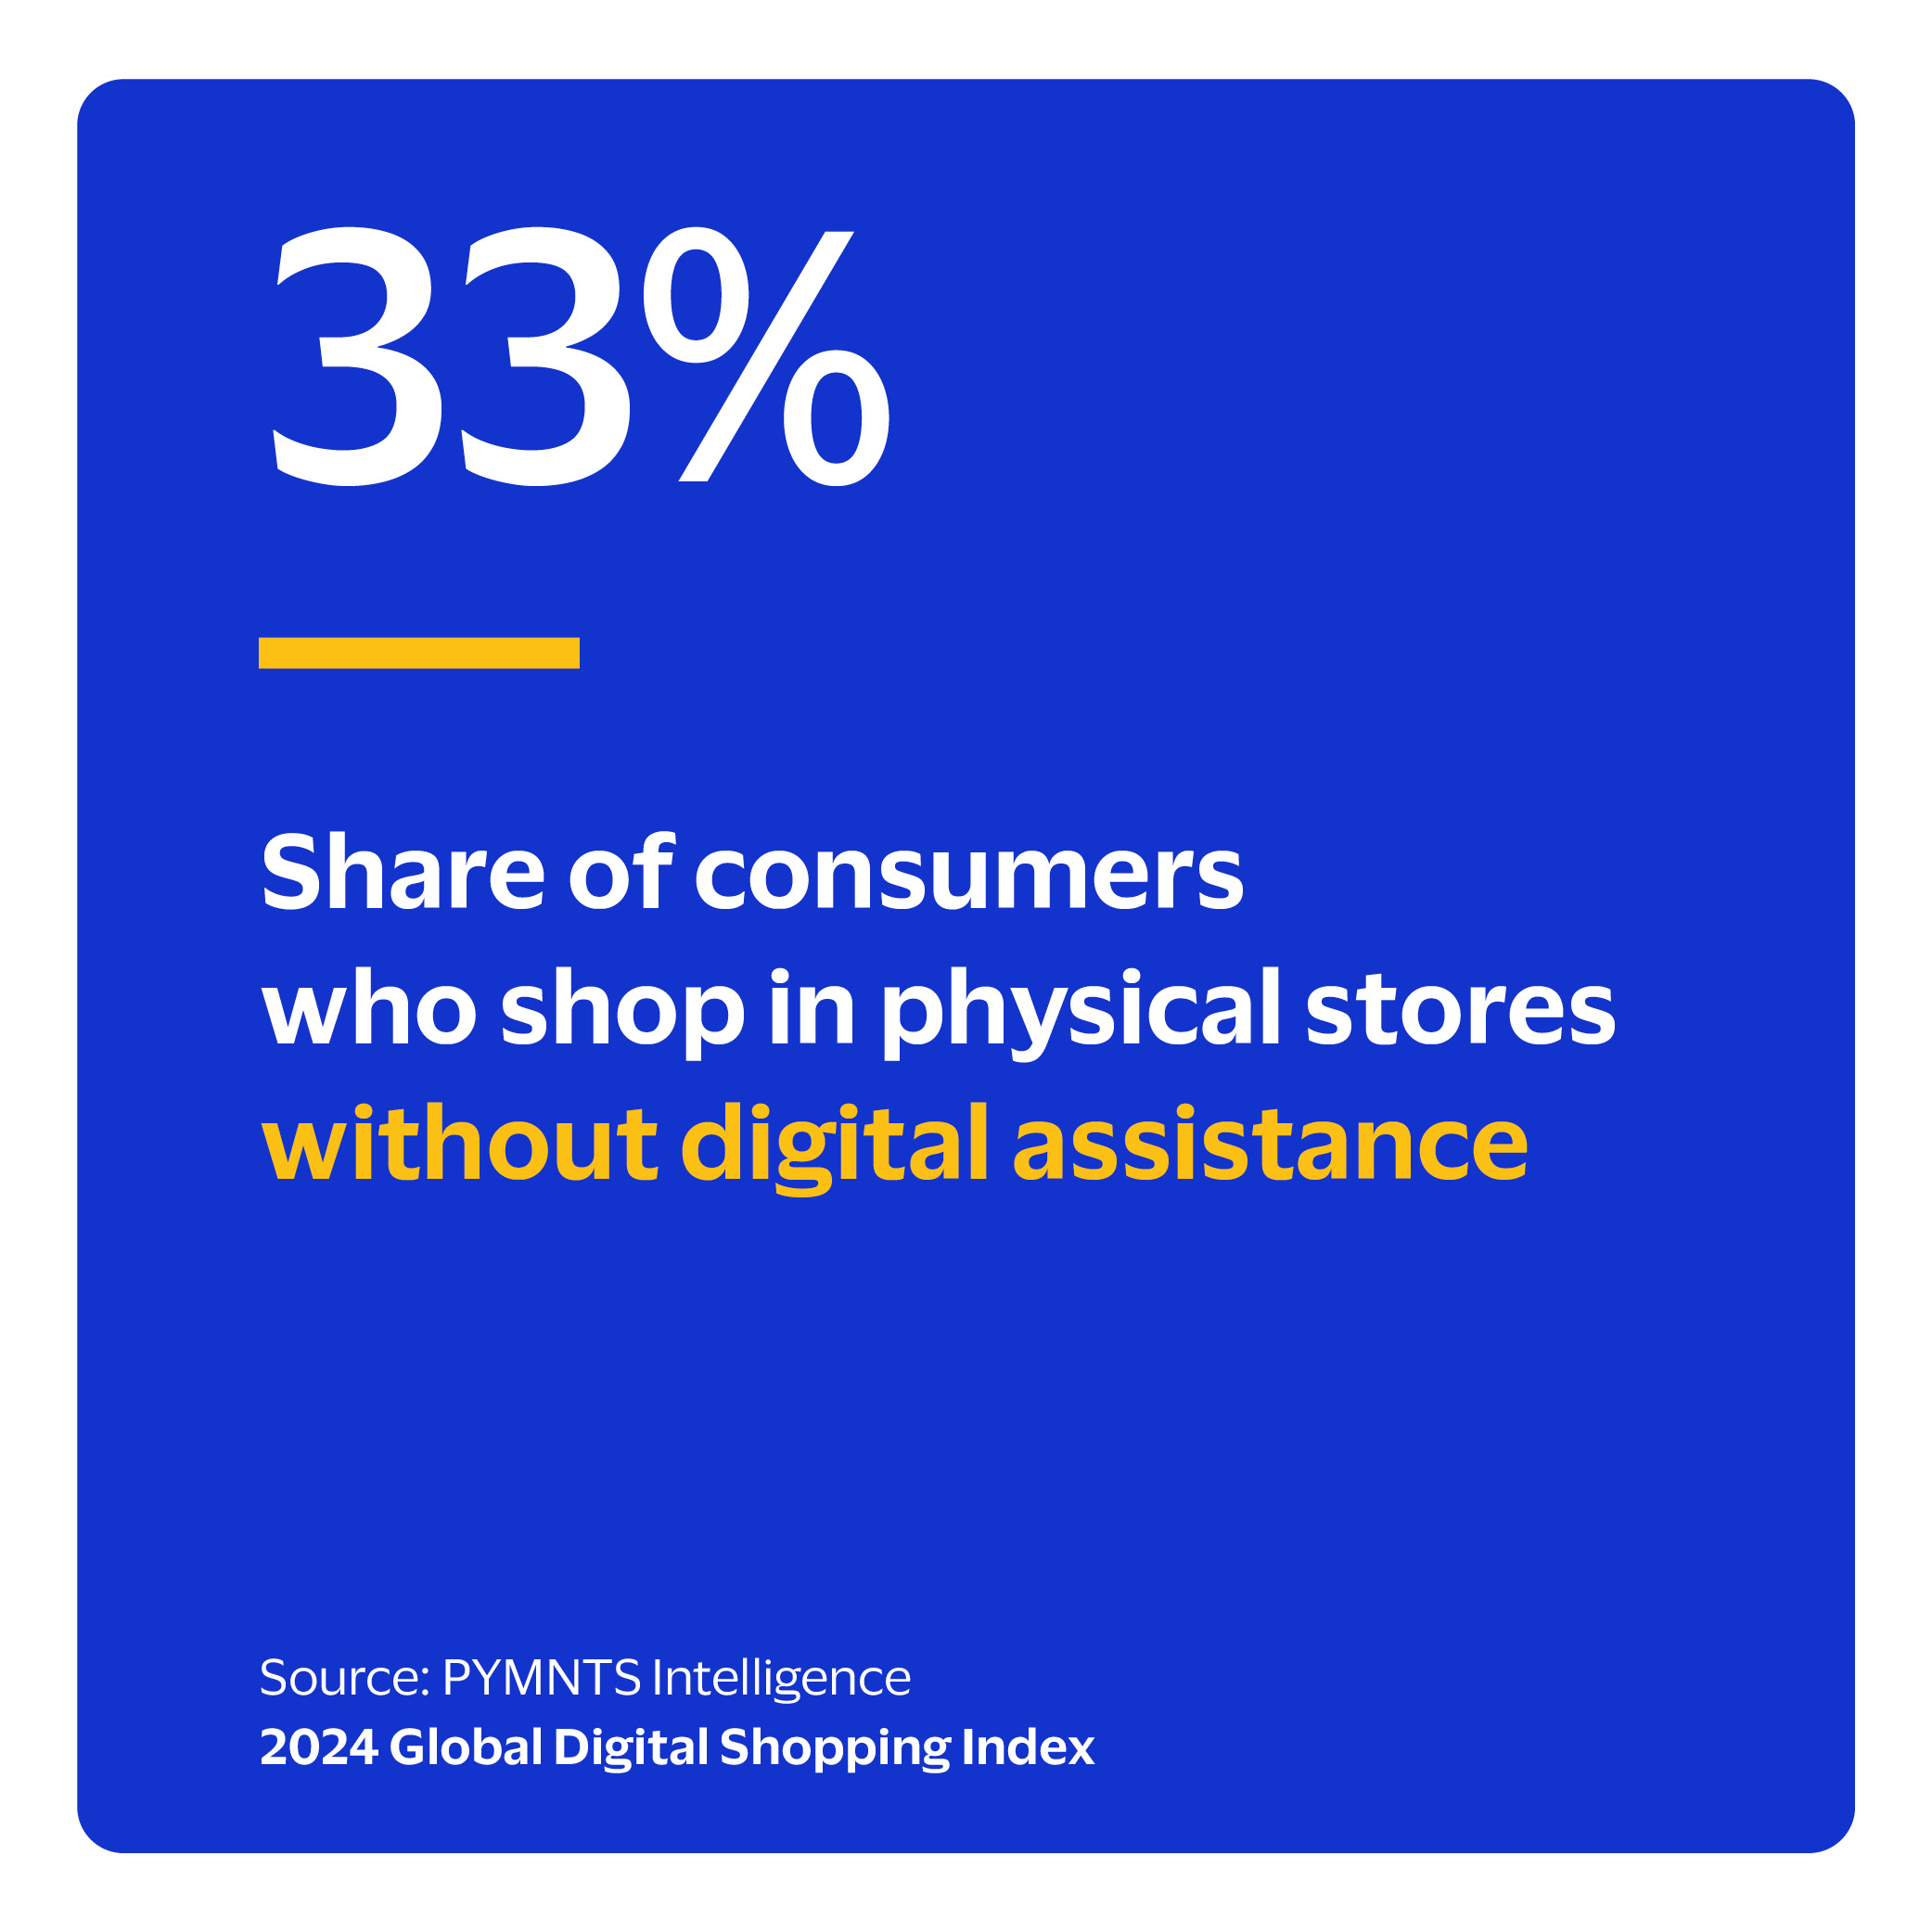 33%: Share of consumers who shop in physical stores without digital assistance